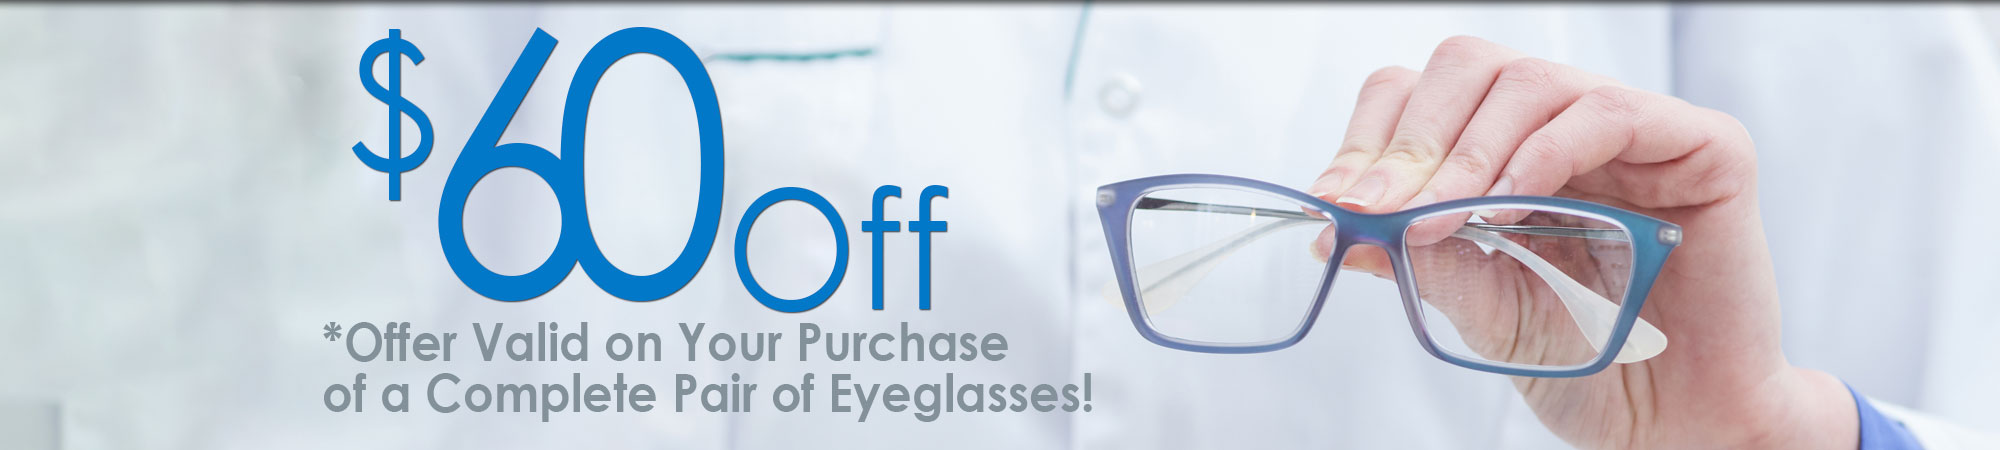 $60 Off Offer Valid on Your Purchase of a Complete Pair of Eyeglasses